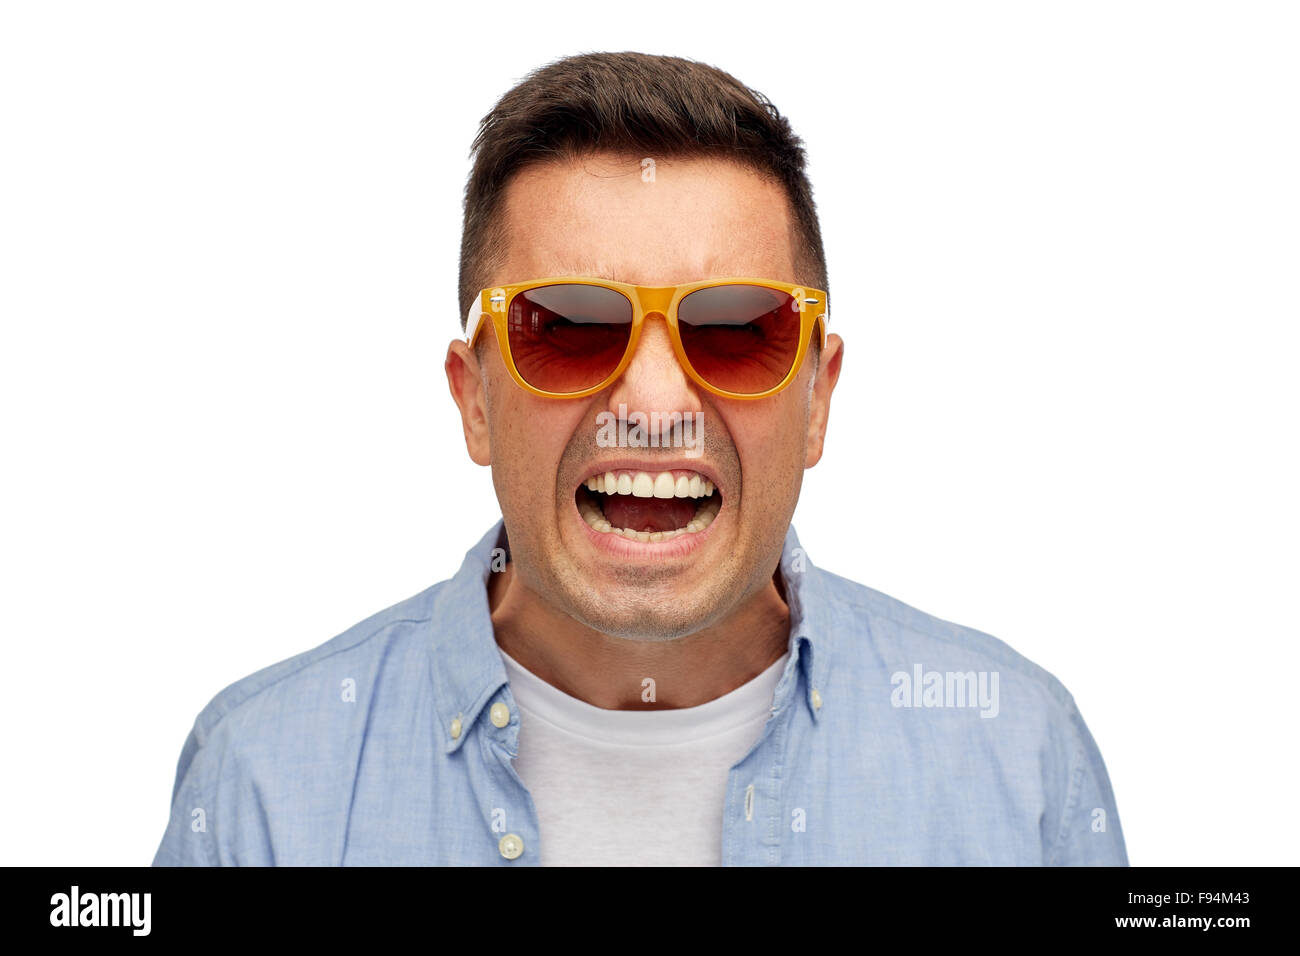 face of angry man in shirt and sunglasses Stock Photo